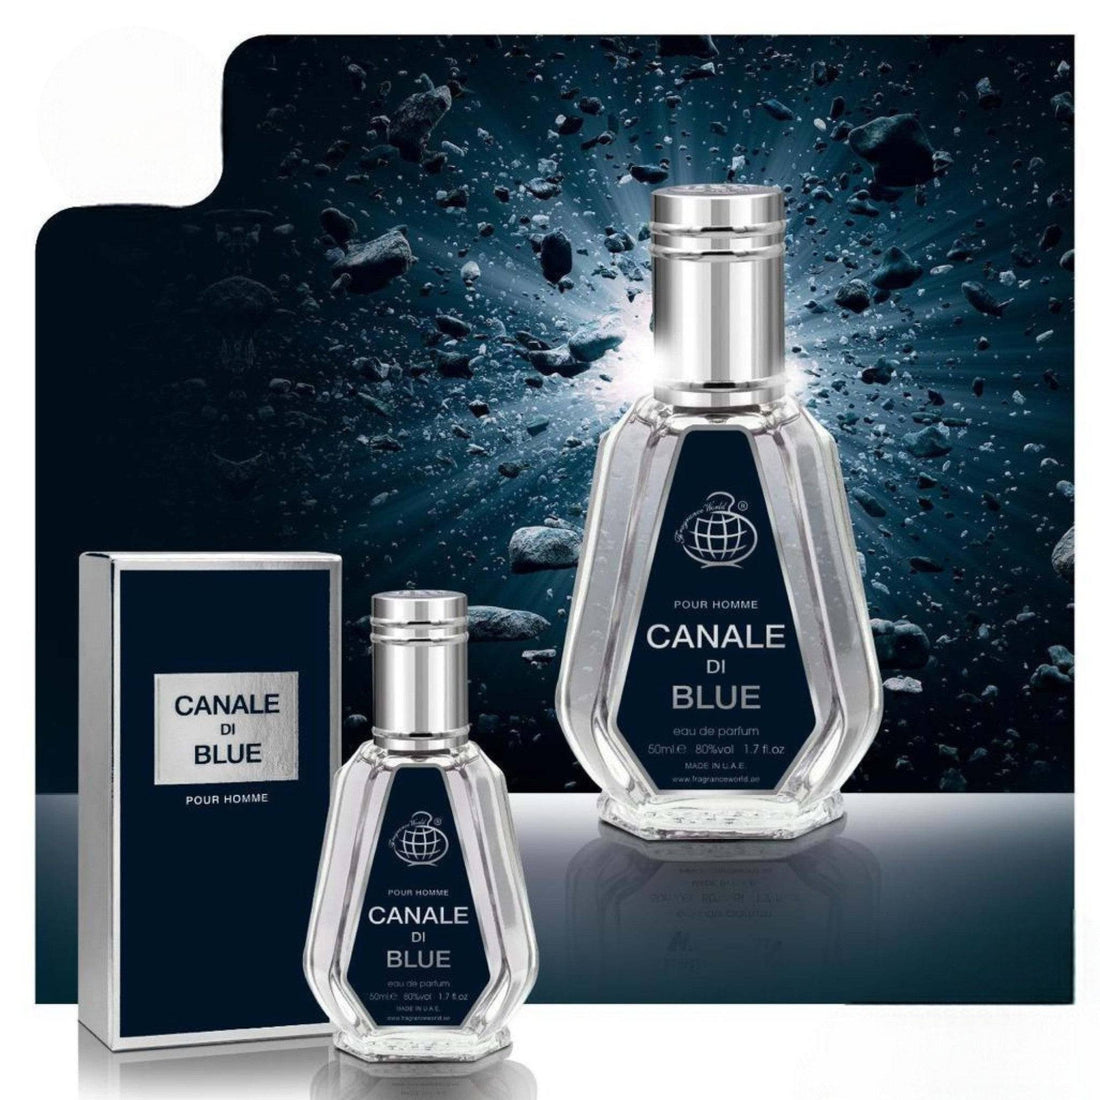 Elegant bottle of Canale Di Blue Eau De Parfum by Fragrance World, showcasing its refined and vibrant design with citrus and floral notes.